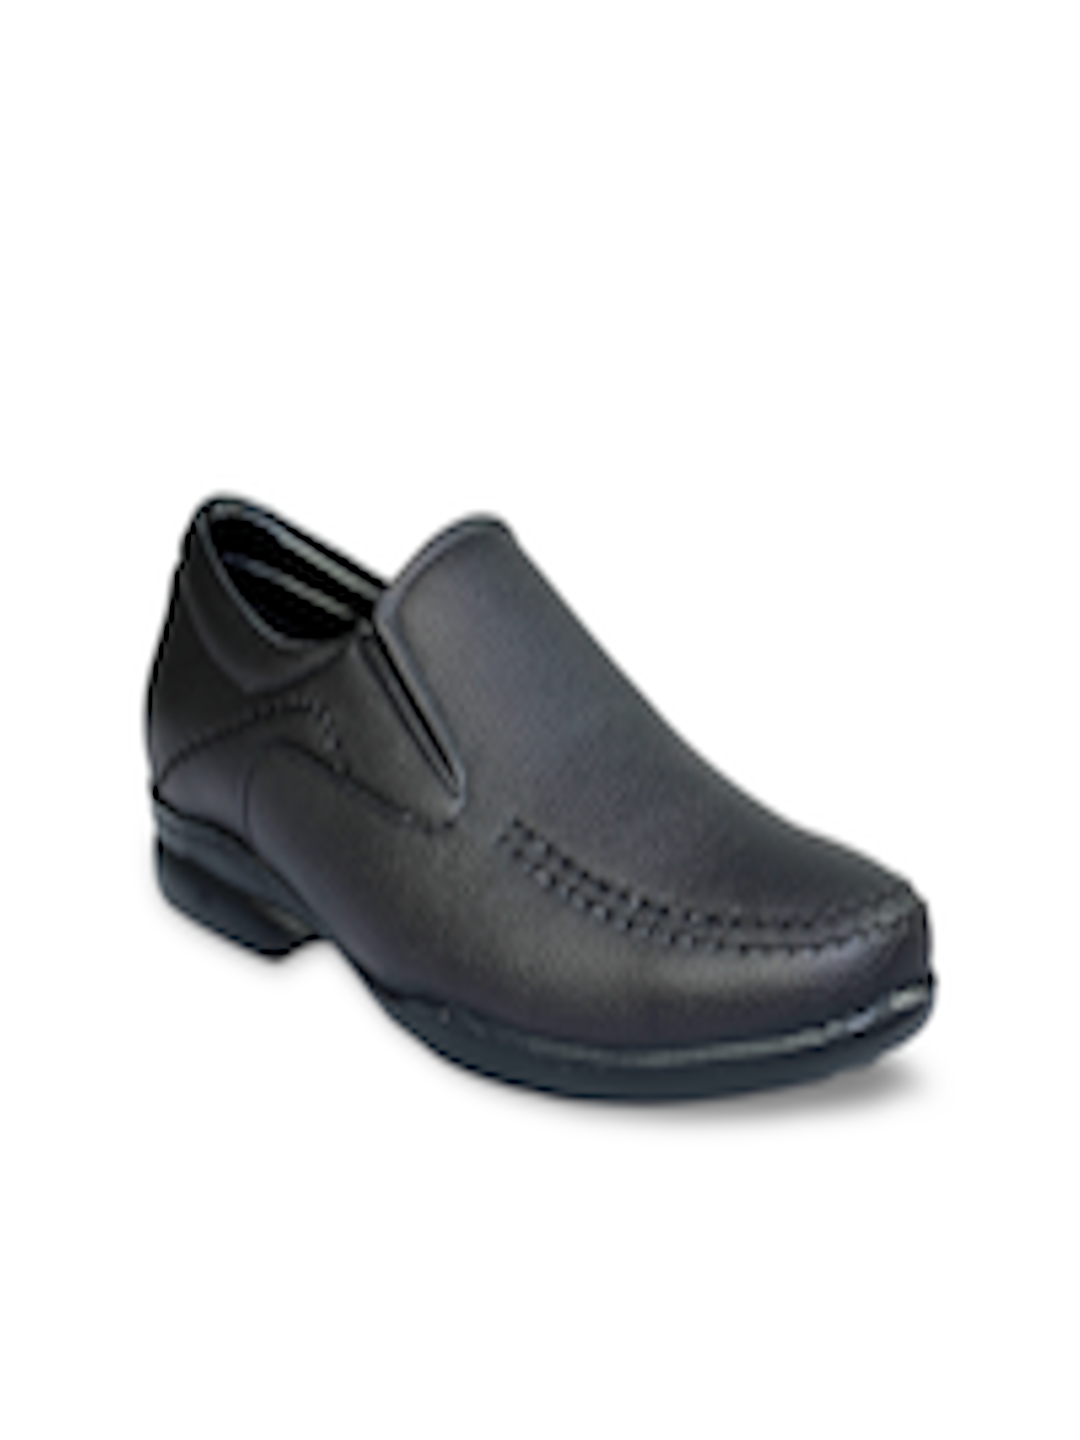 Buy Tycoon Men Black Formal Shoes - Formal Shoes for Men 644393 | Myntra